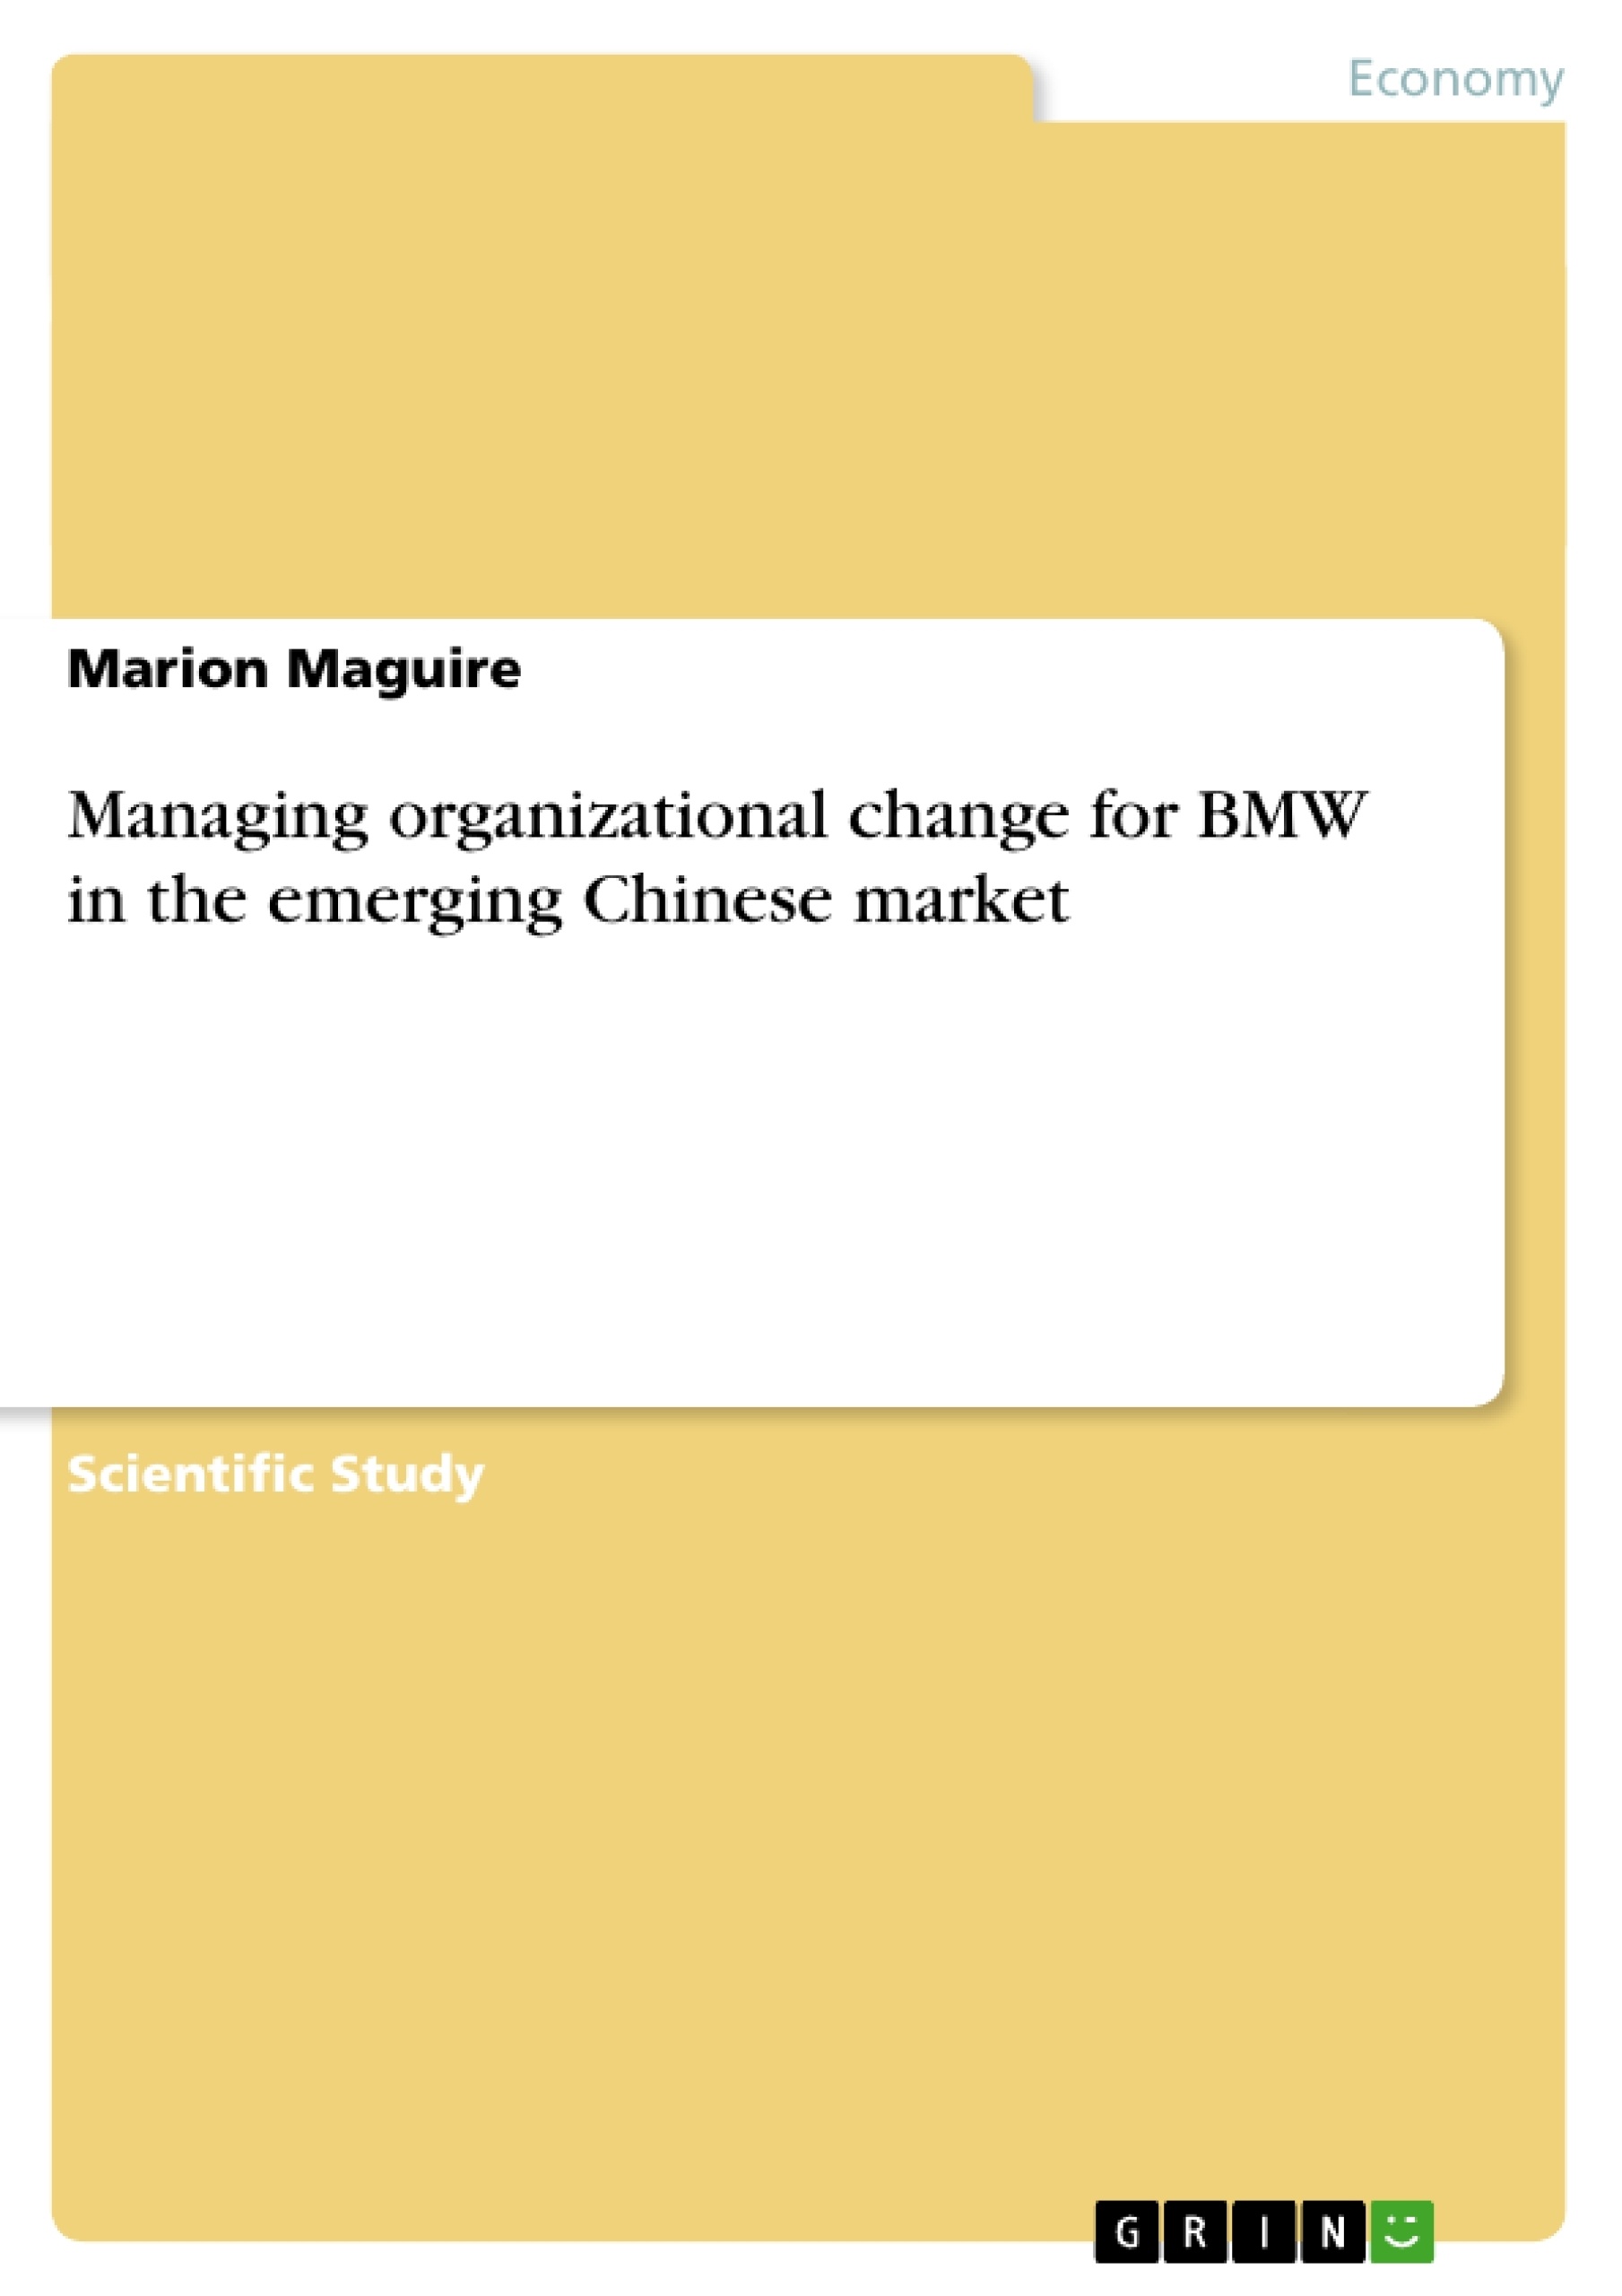 Title: Managing organizational change for BMW in the emerging Chinese market